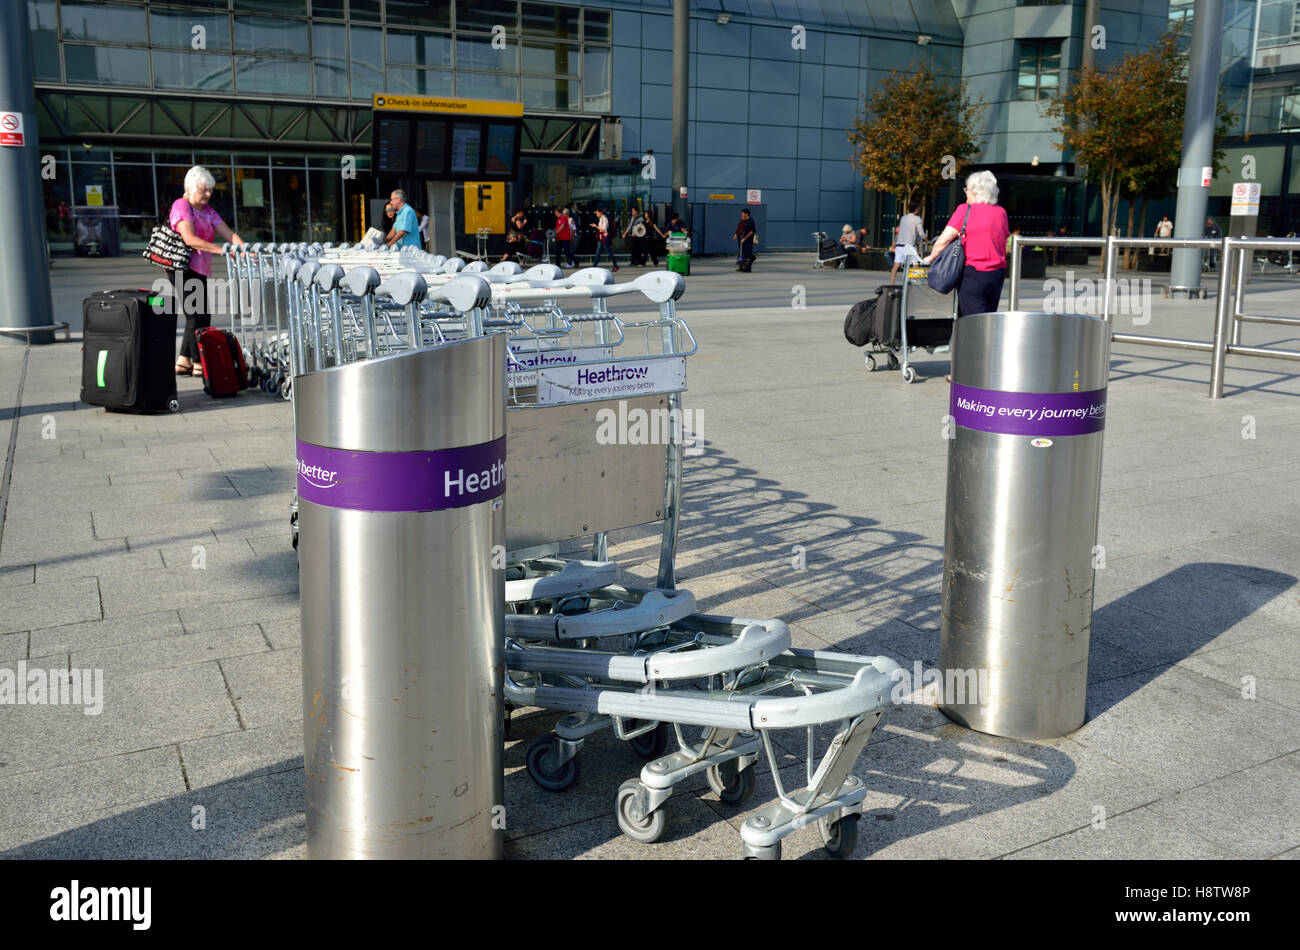 Heathrow airport terminal 3, collection point for baggage trolleys, London, Britain, UK Stock Photo